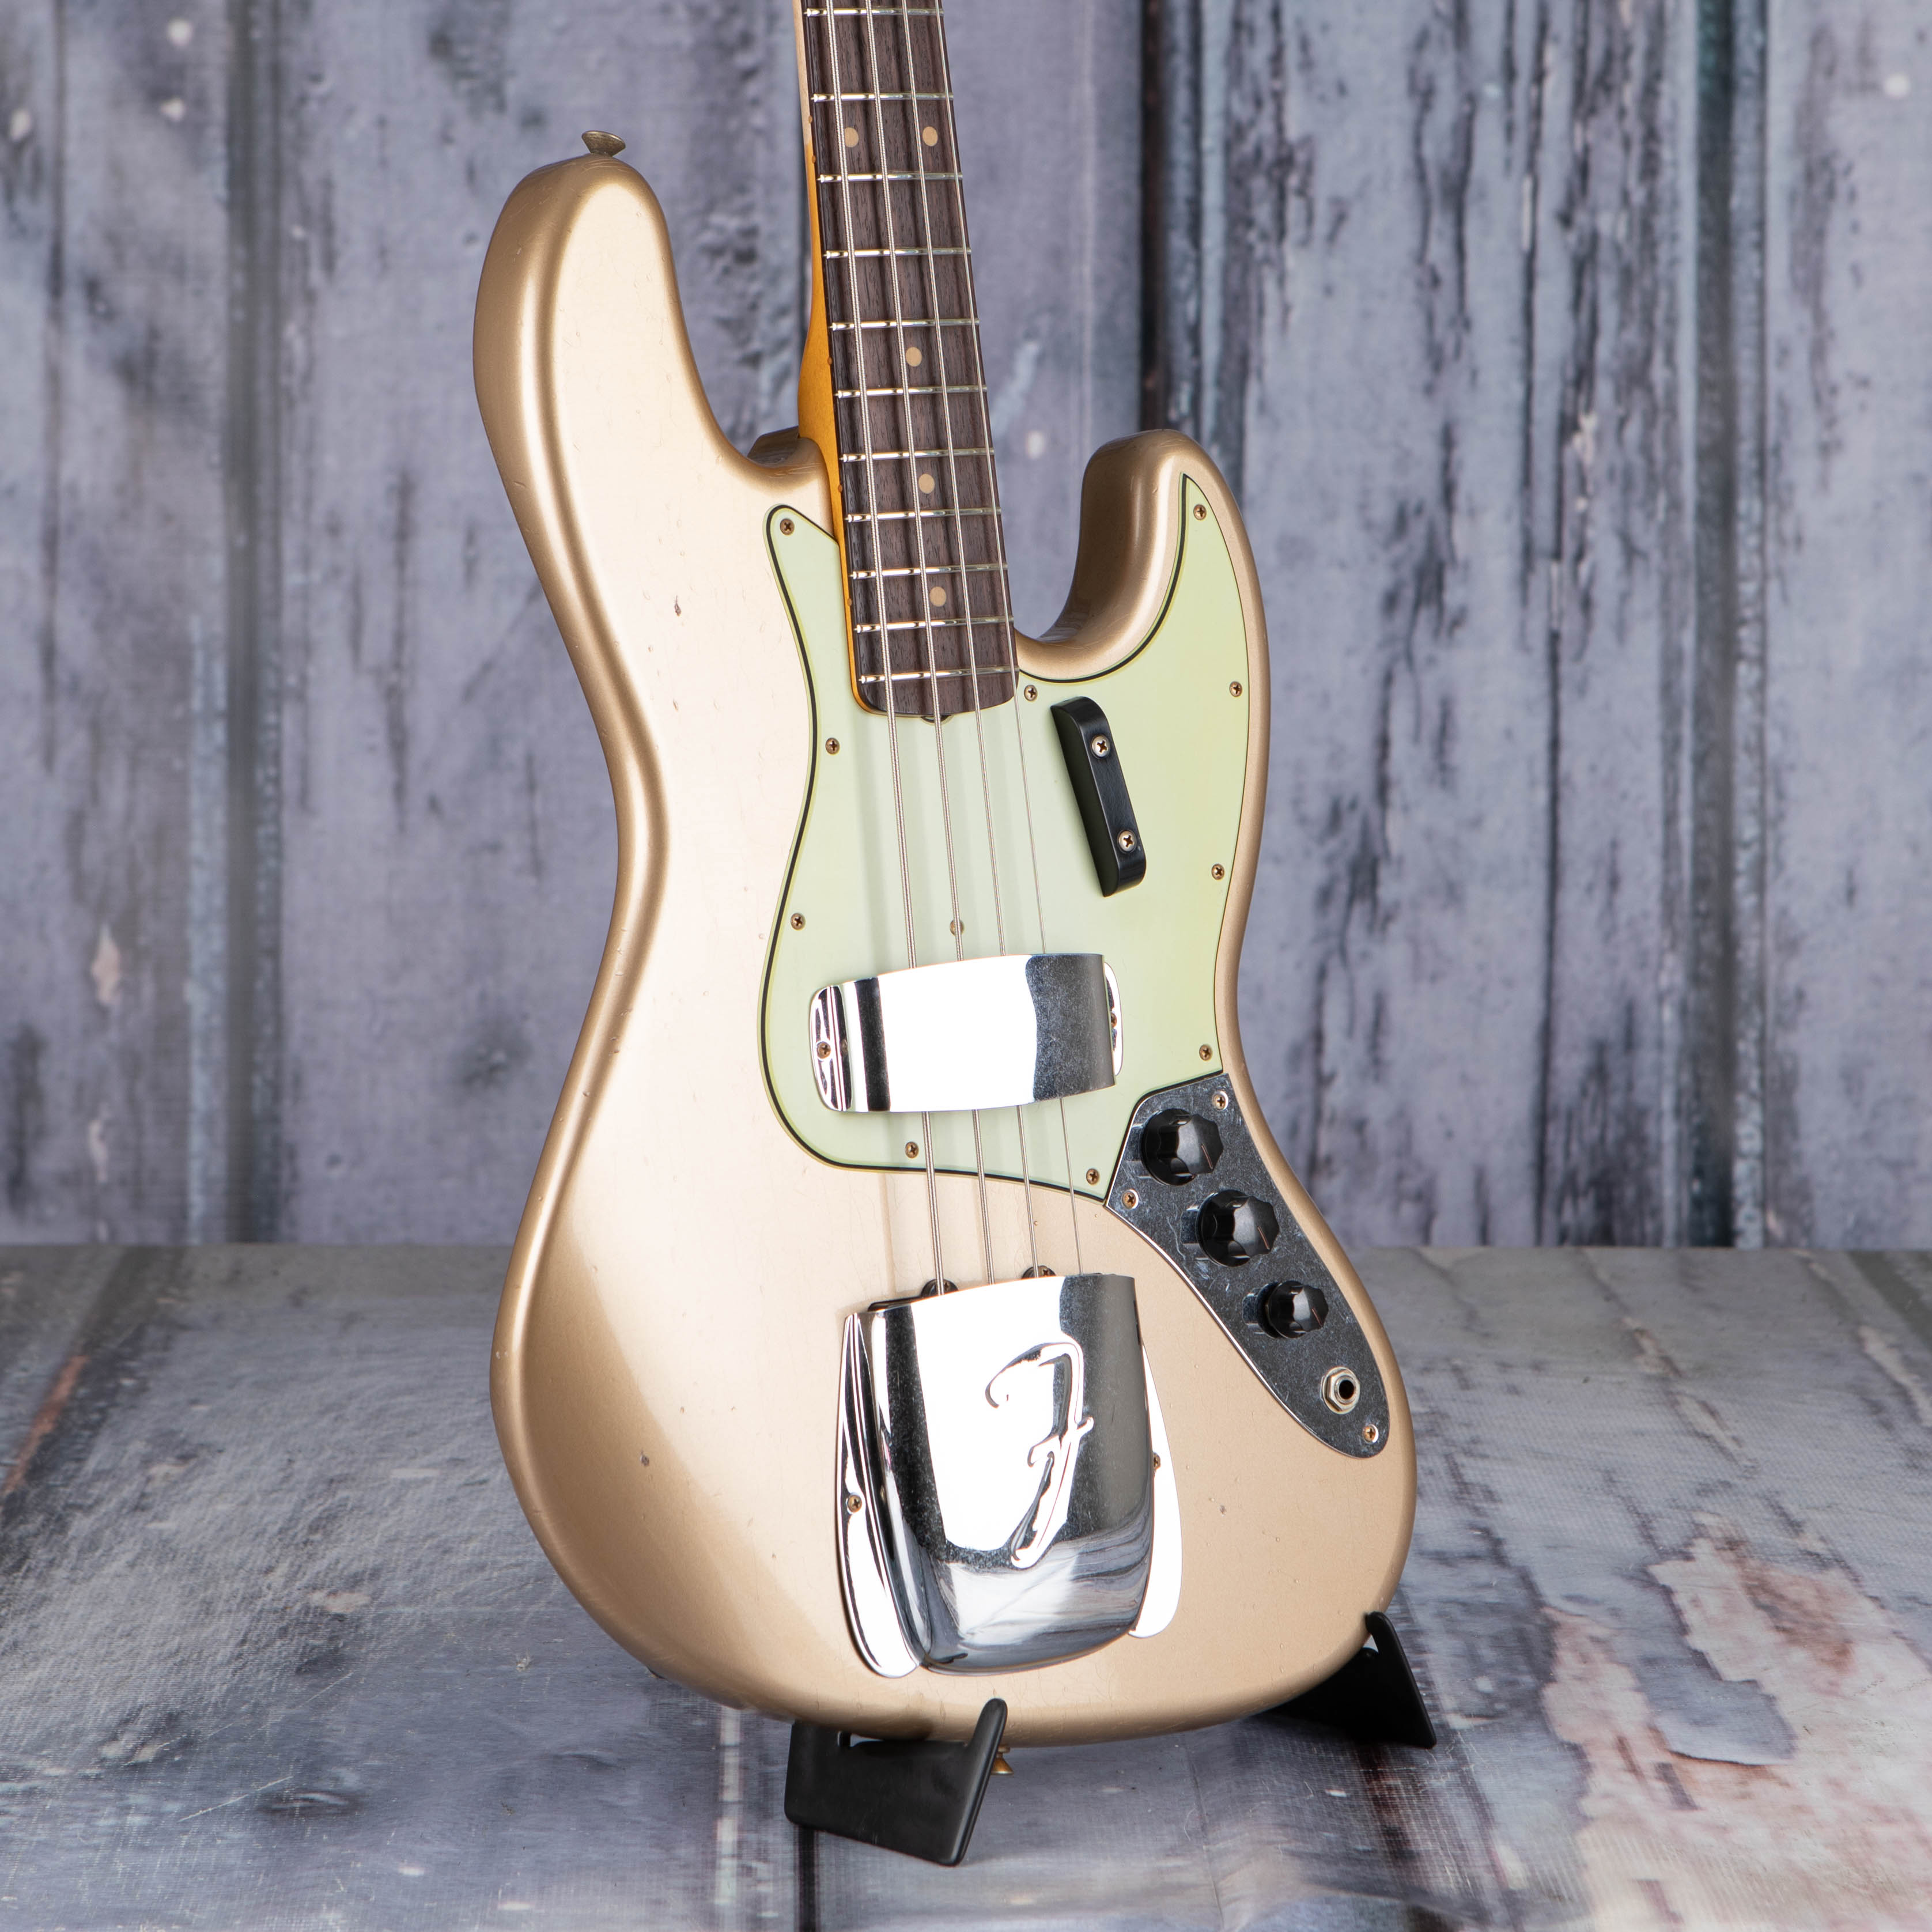 Fender Custom Shop Limited Edition 1964 Jazz Bass Journeyman Relic Electric Bass Guitar, Aged Shoreline Gold, angle